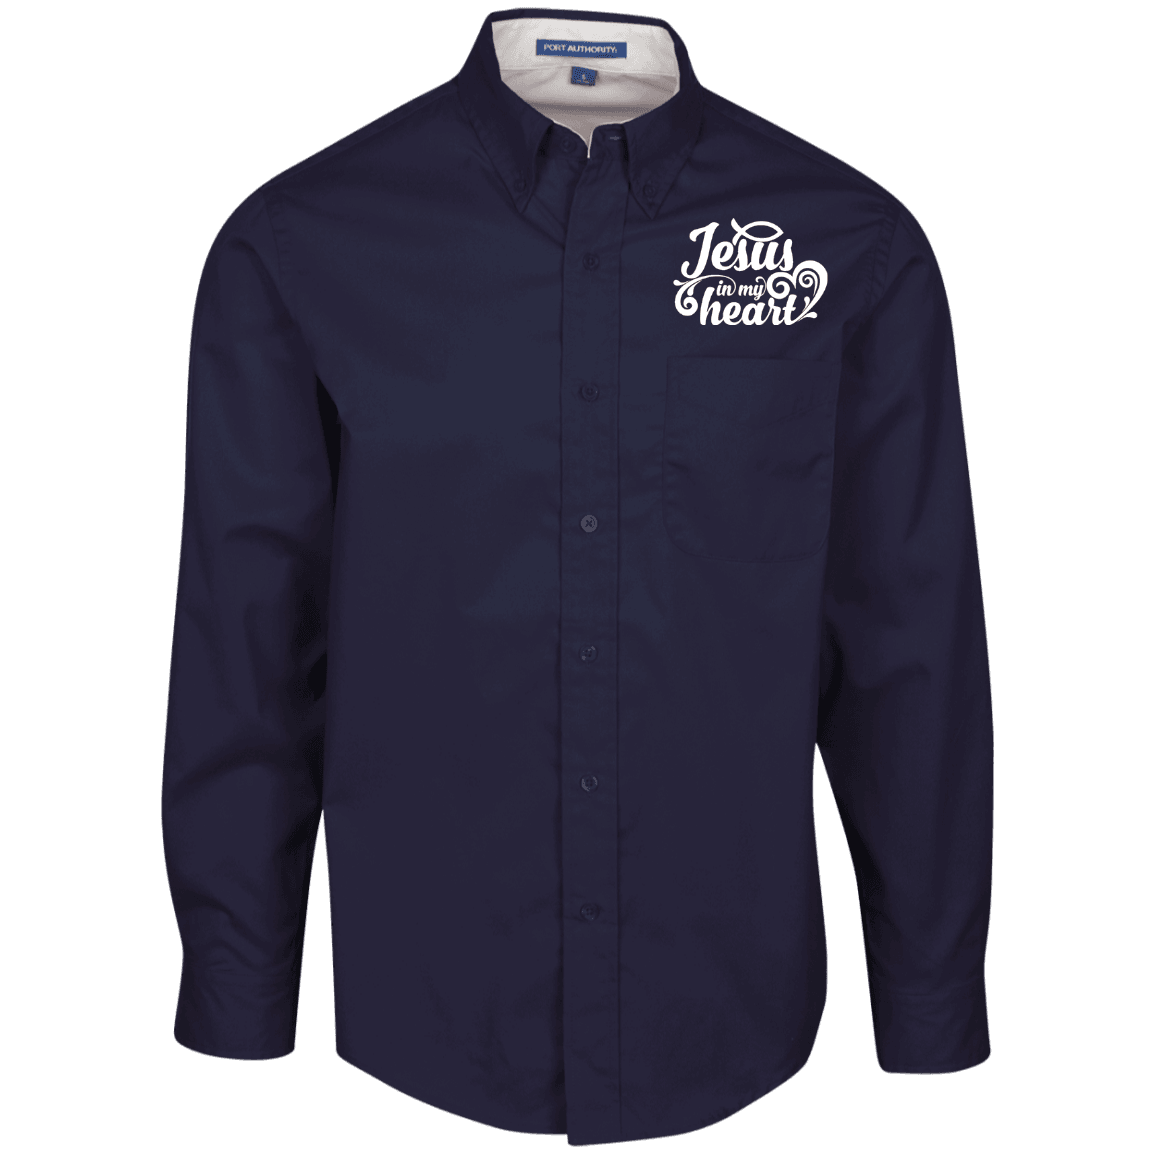 Designs by MyUtopia Shout Out:Jesus in My Heart Embroidered Port Authority Men's Long Sleeve Dress Shirt - Navy Blue,Navy/Light Stone / X-Small,Dress Shirts